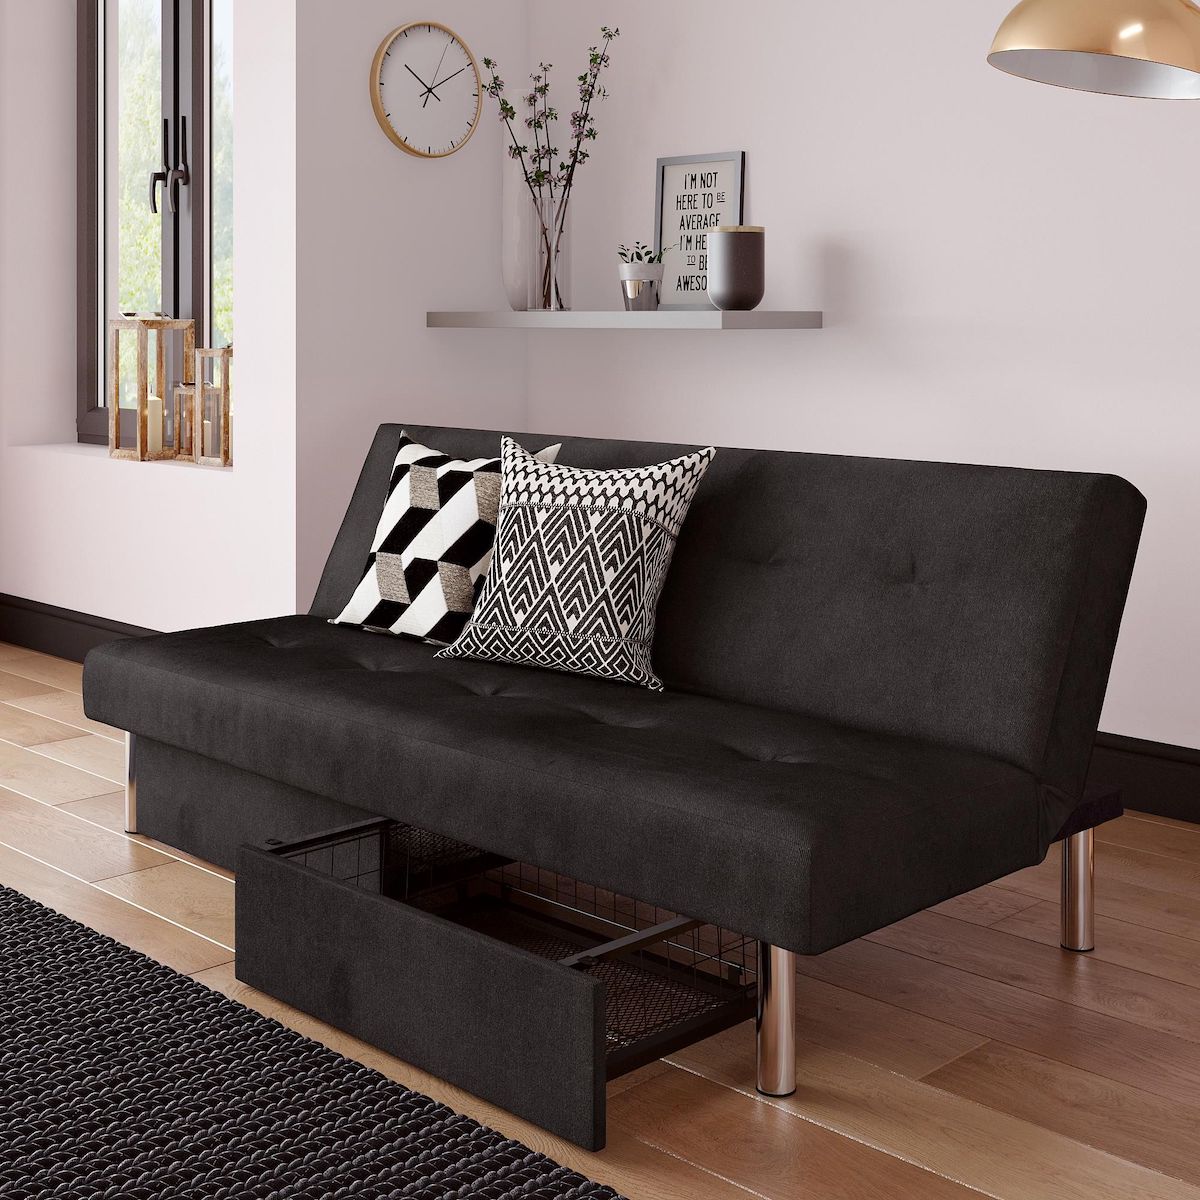 Ideas For The Living Room, How To Choose A Good Sofa Bed